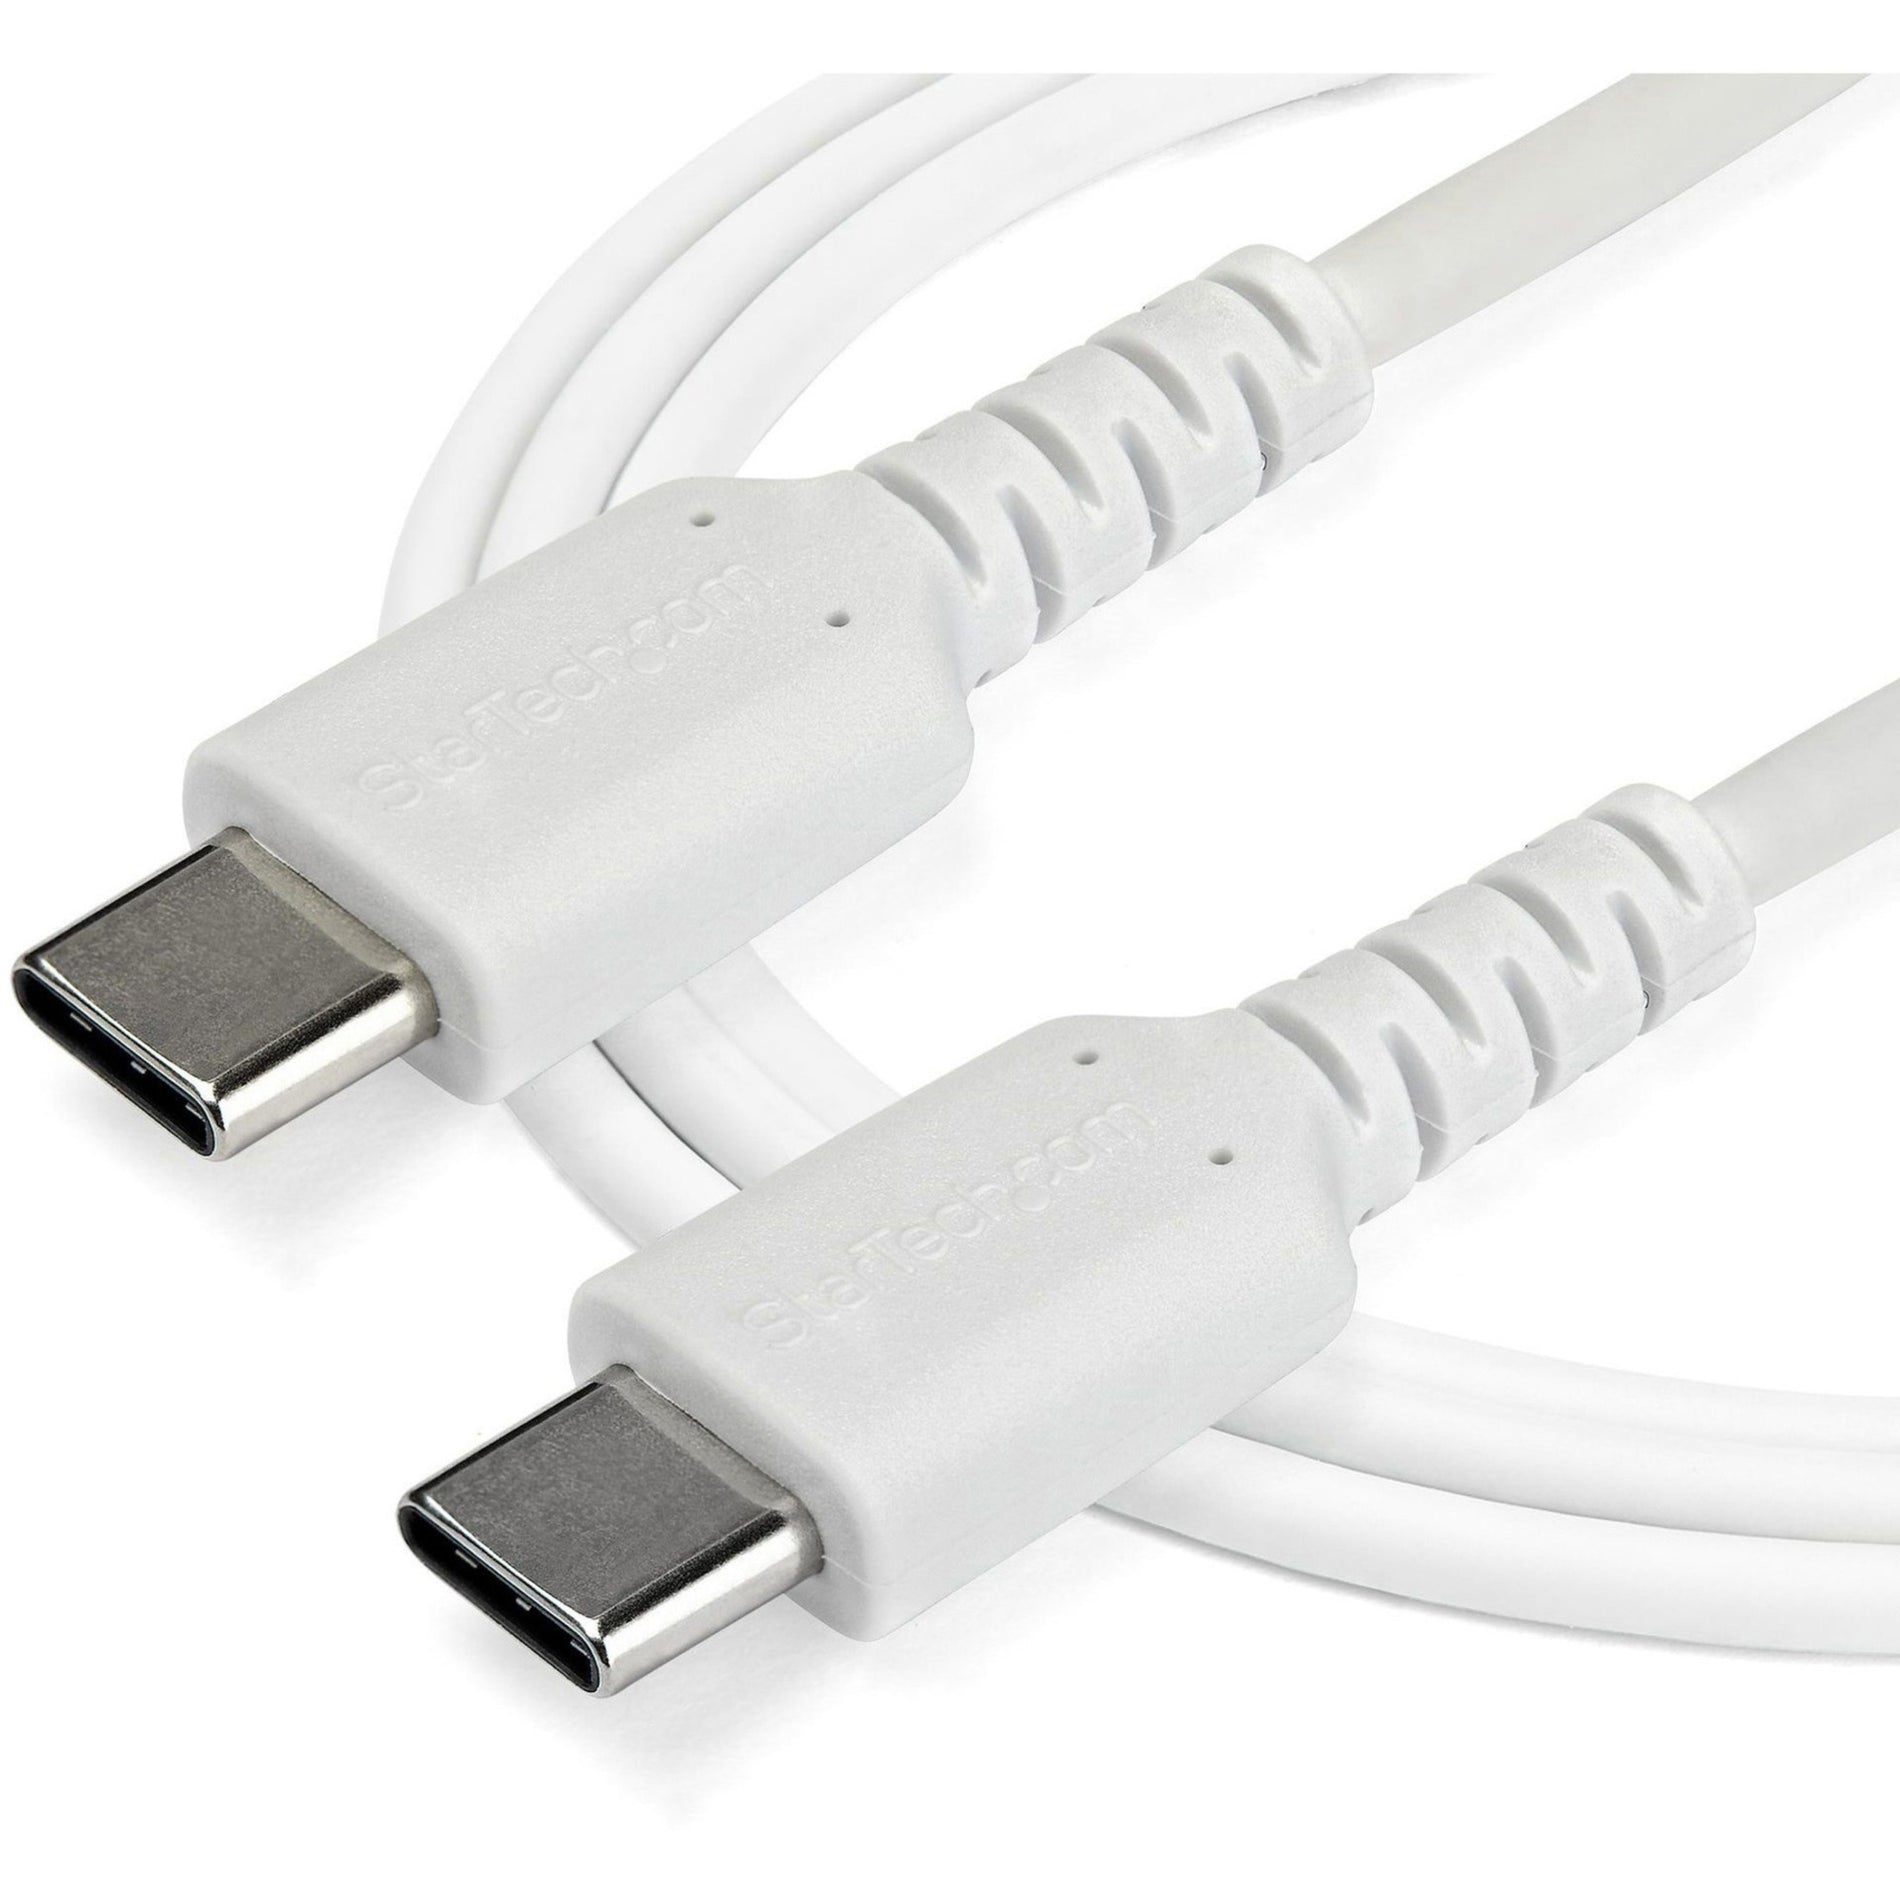 StarTech.com RUSB2CC2MW 2 m (6.6 ft) USB C Cable - High Quality USB 2.0 Type C Cable, White - Durable USB Charging Cable